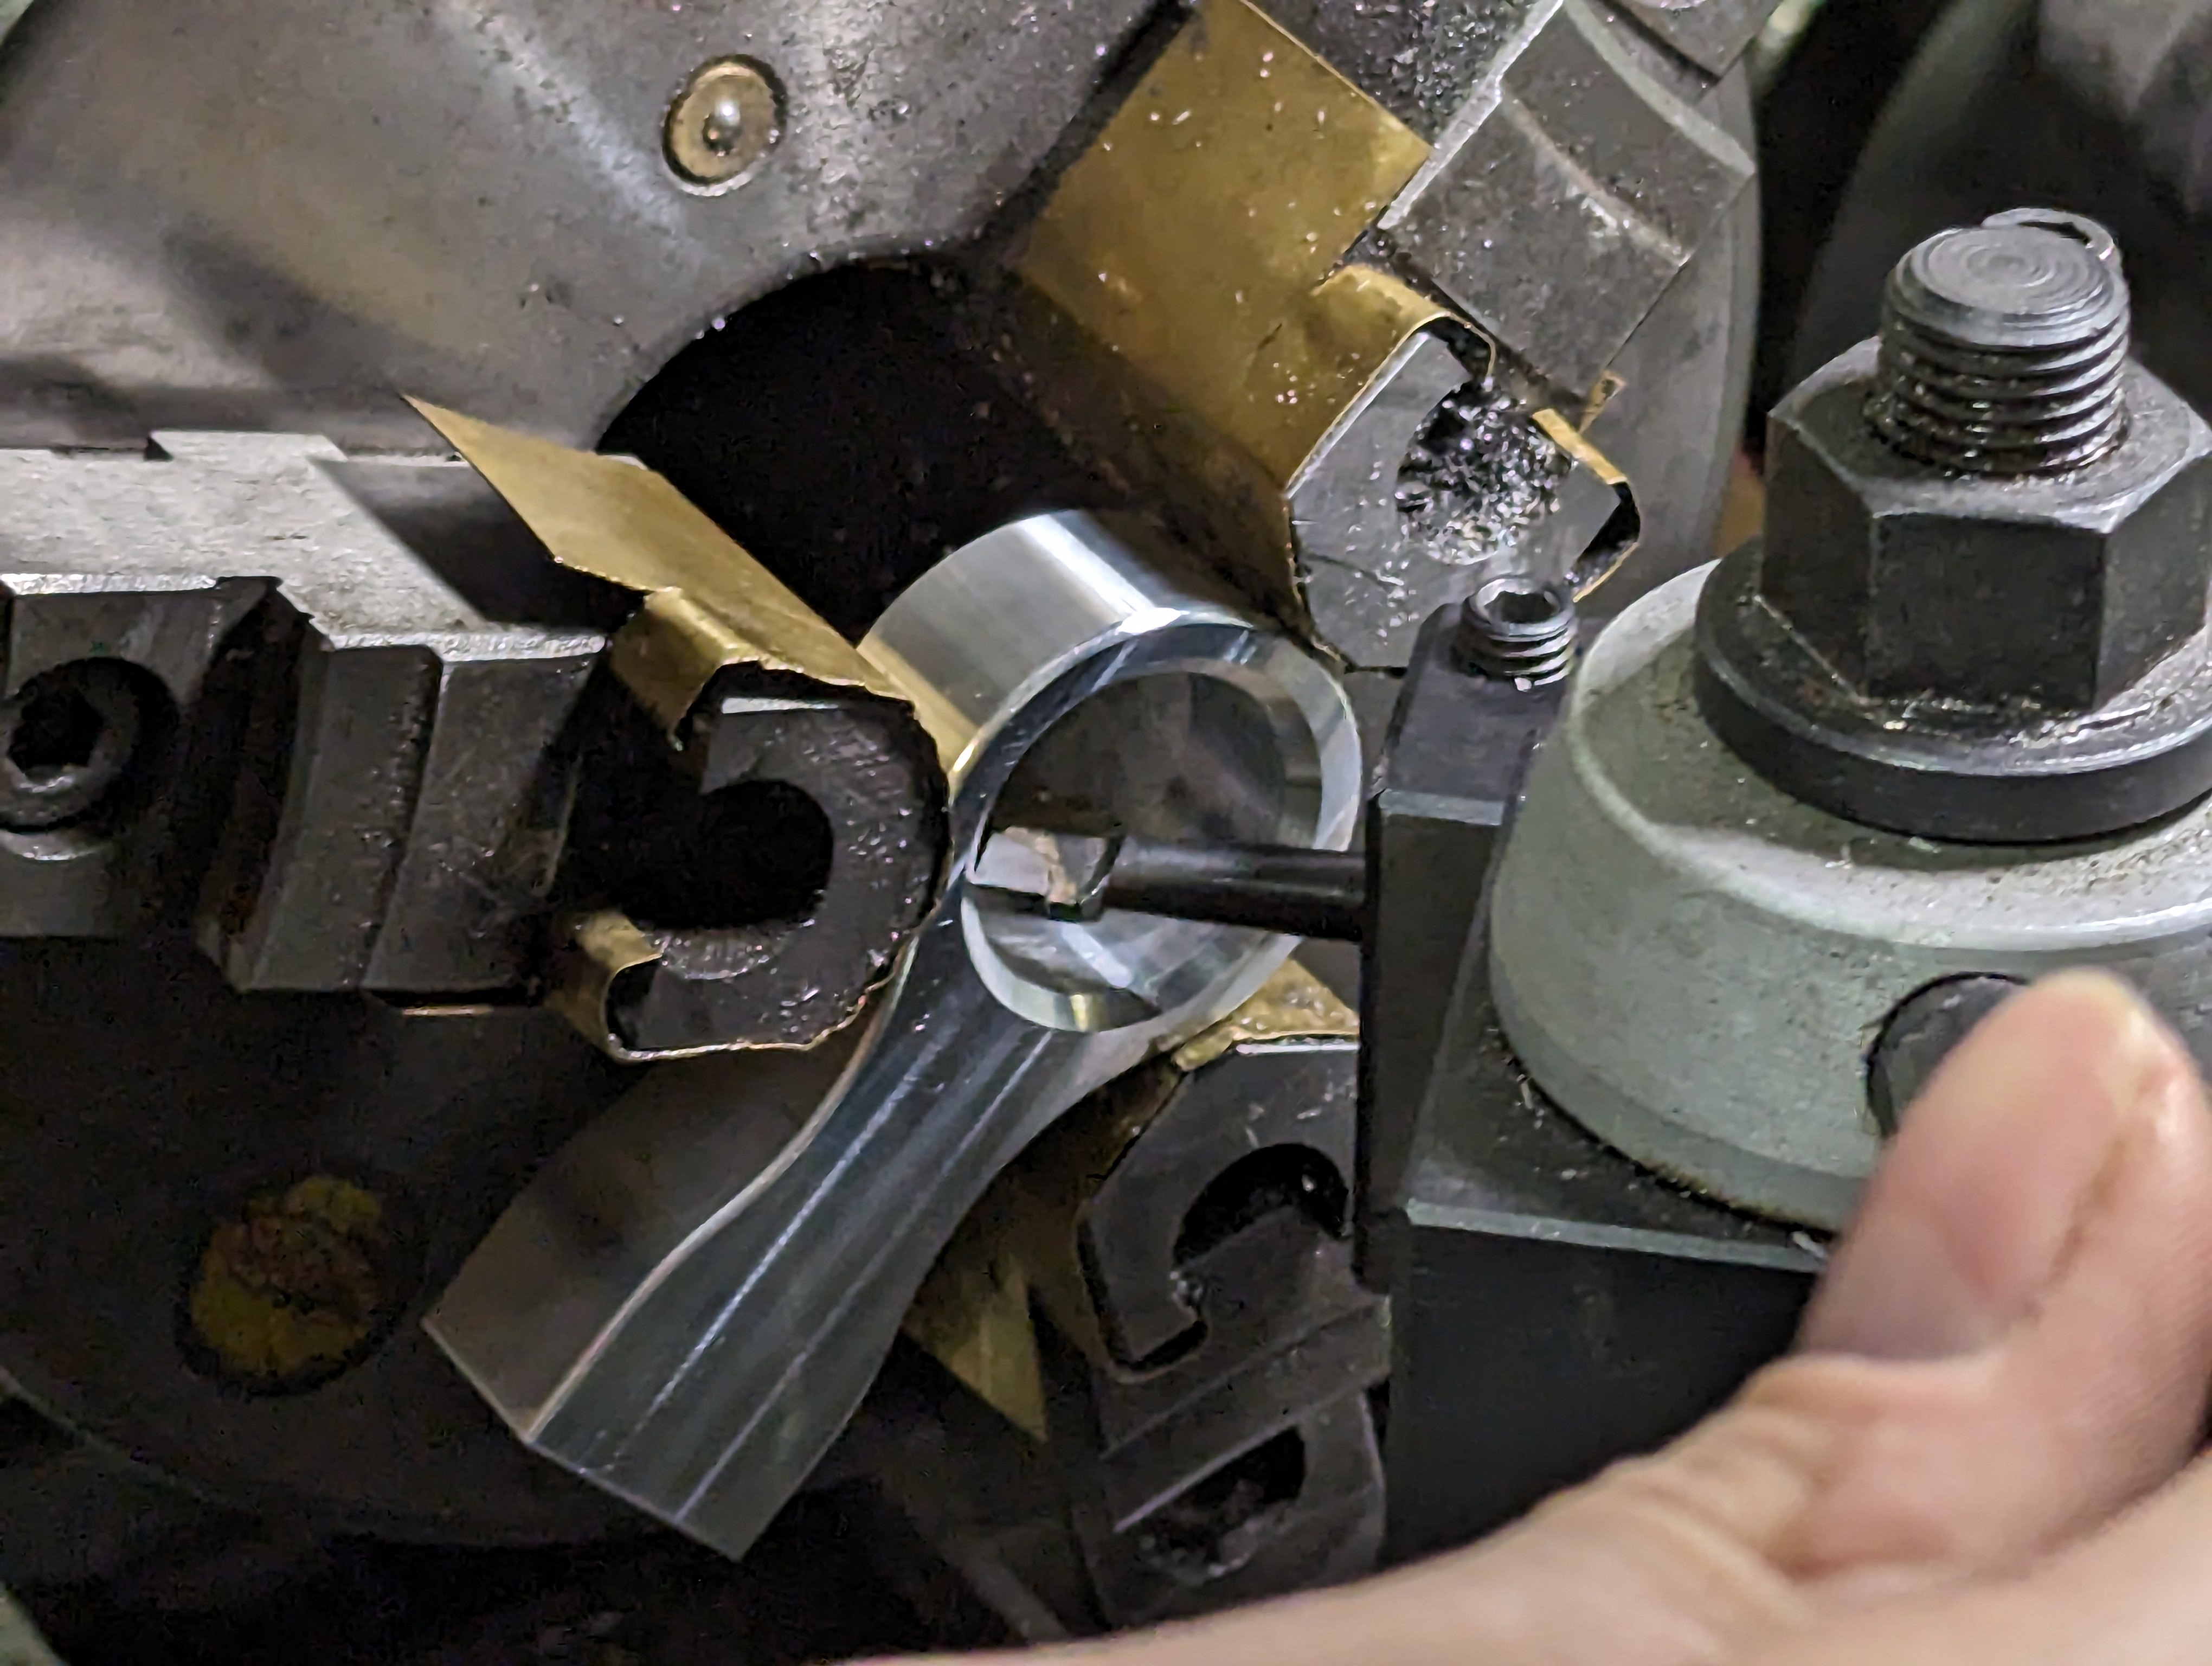 Close-up of the tool setup used to machine the groove in the link half